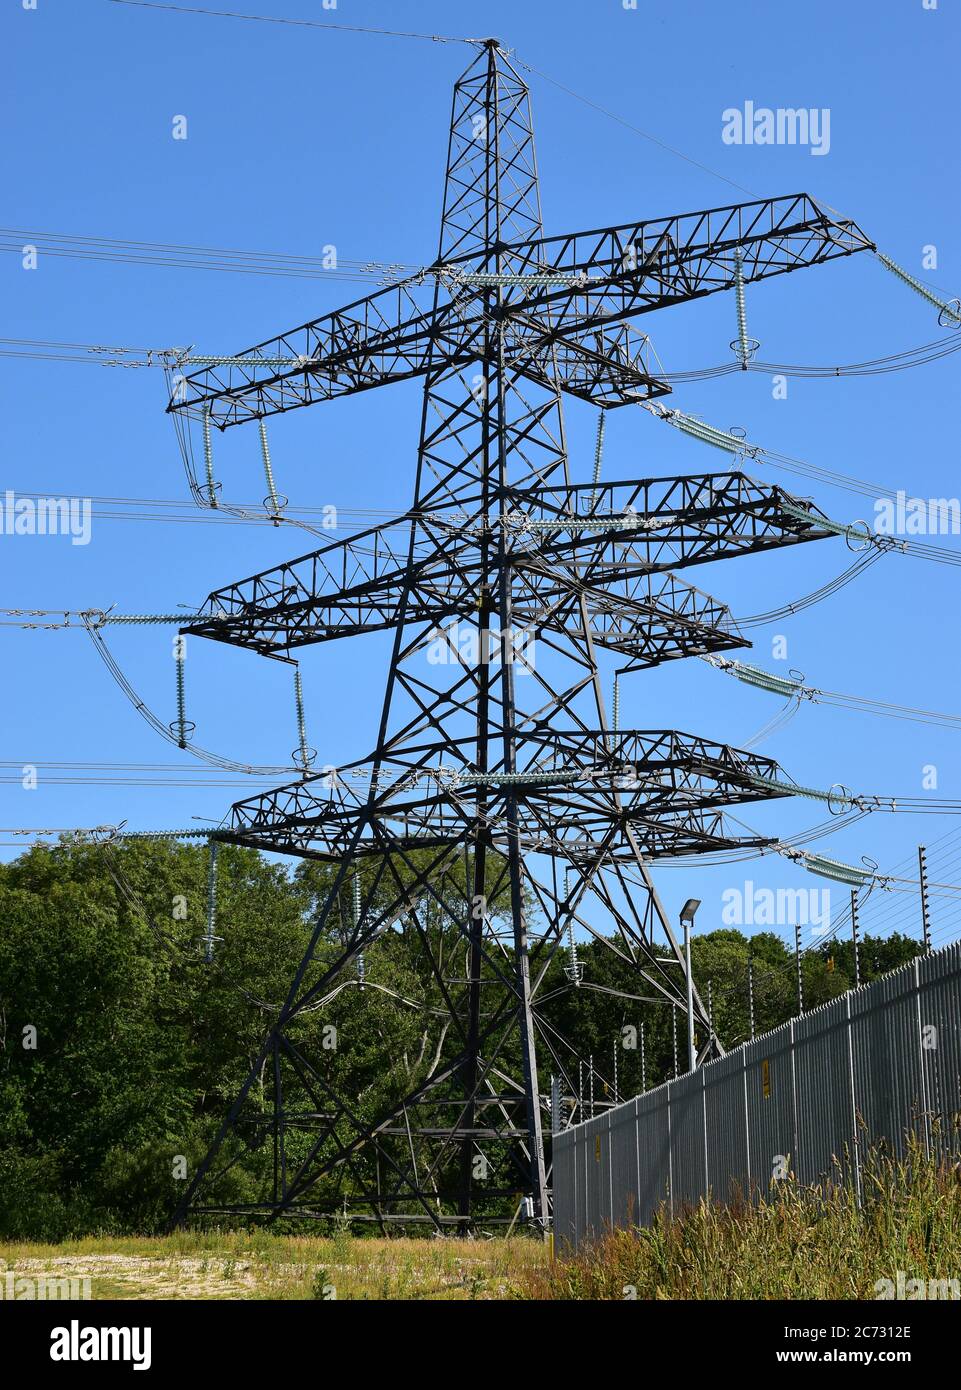 An electricity plyon near Ninfield Substation in Sussex, England, UK. Stock Photo